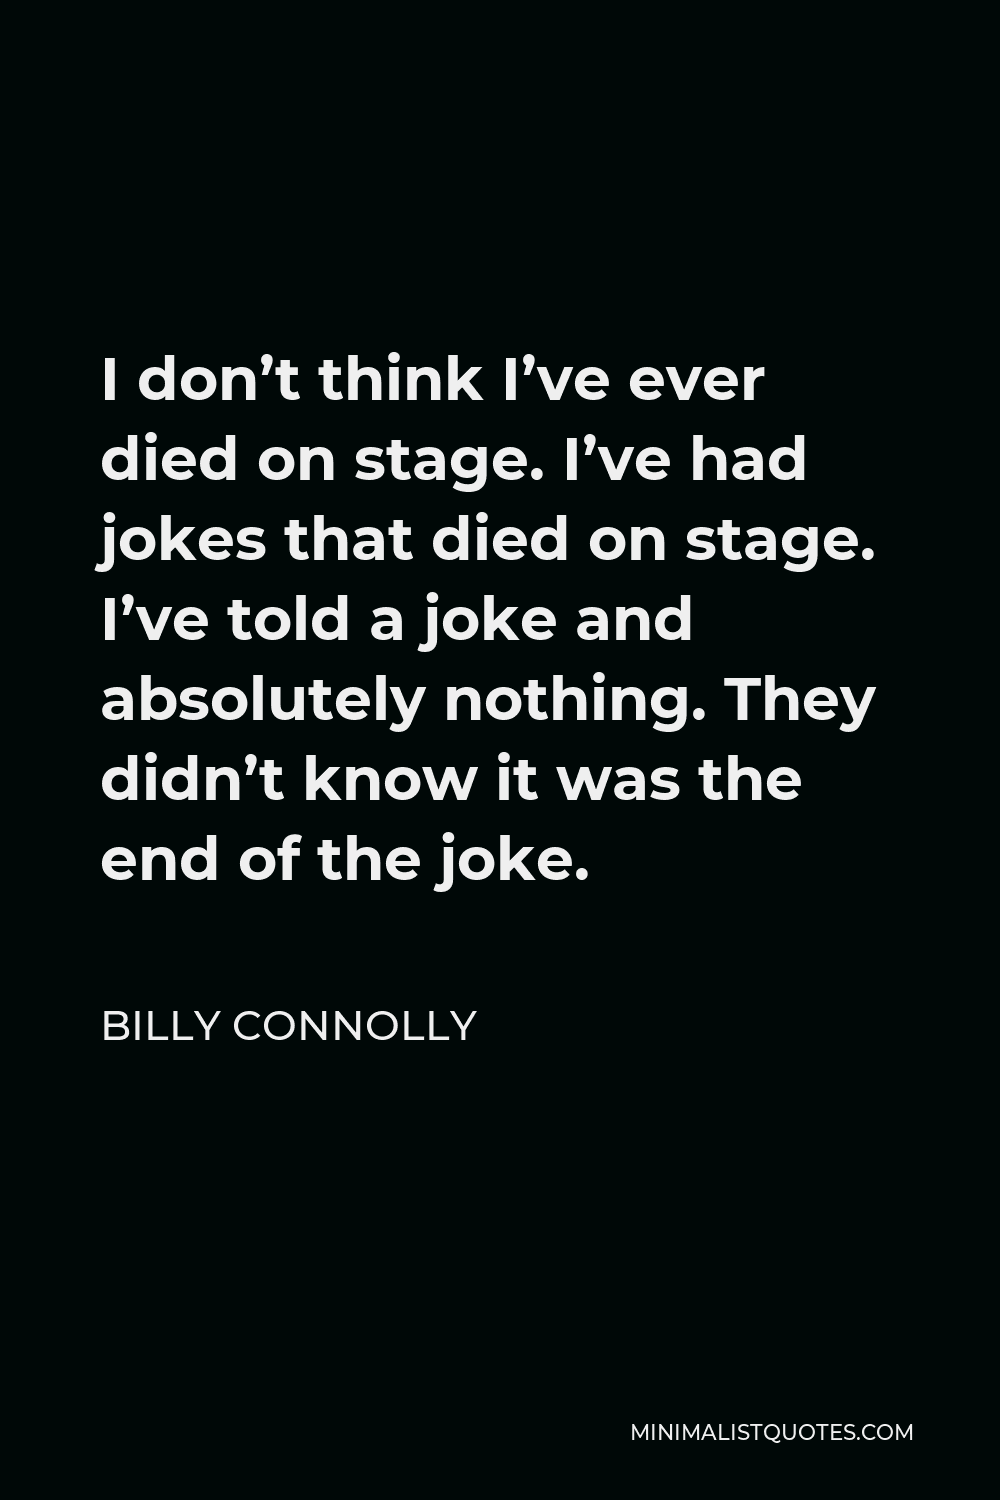 Billy Connolly Quote - I don’t think I’ve ever died on stage. I’ve had jokes that died on stage. I’ve told a joke and absolutely nothing. They didn’t know it was the end of the joke.